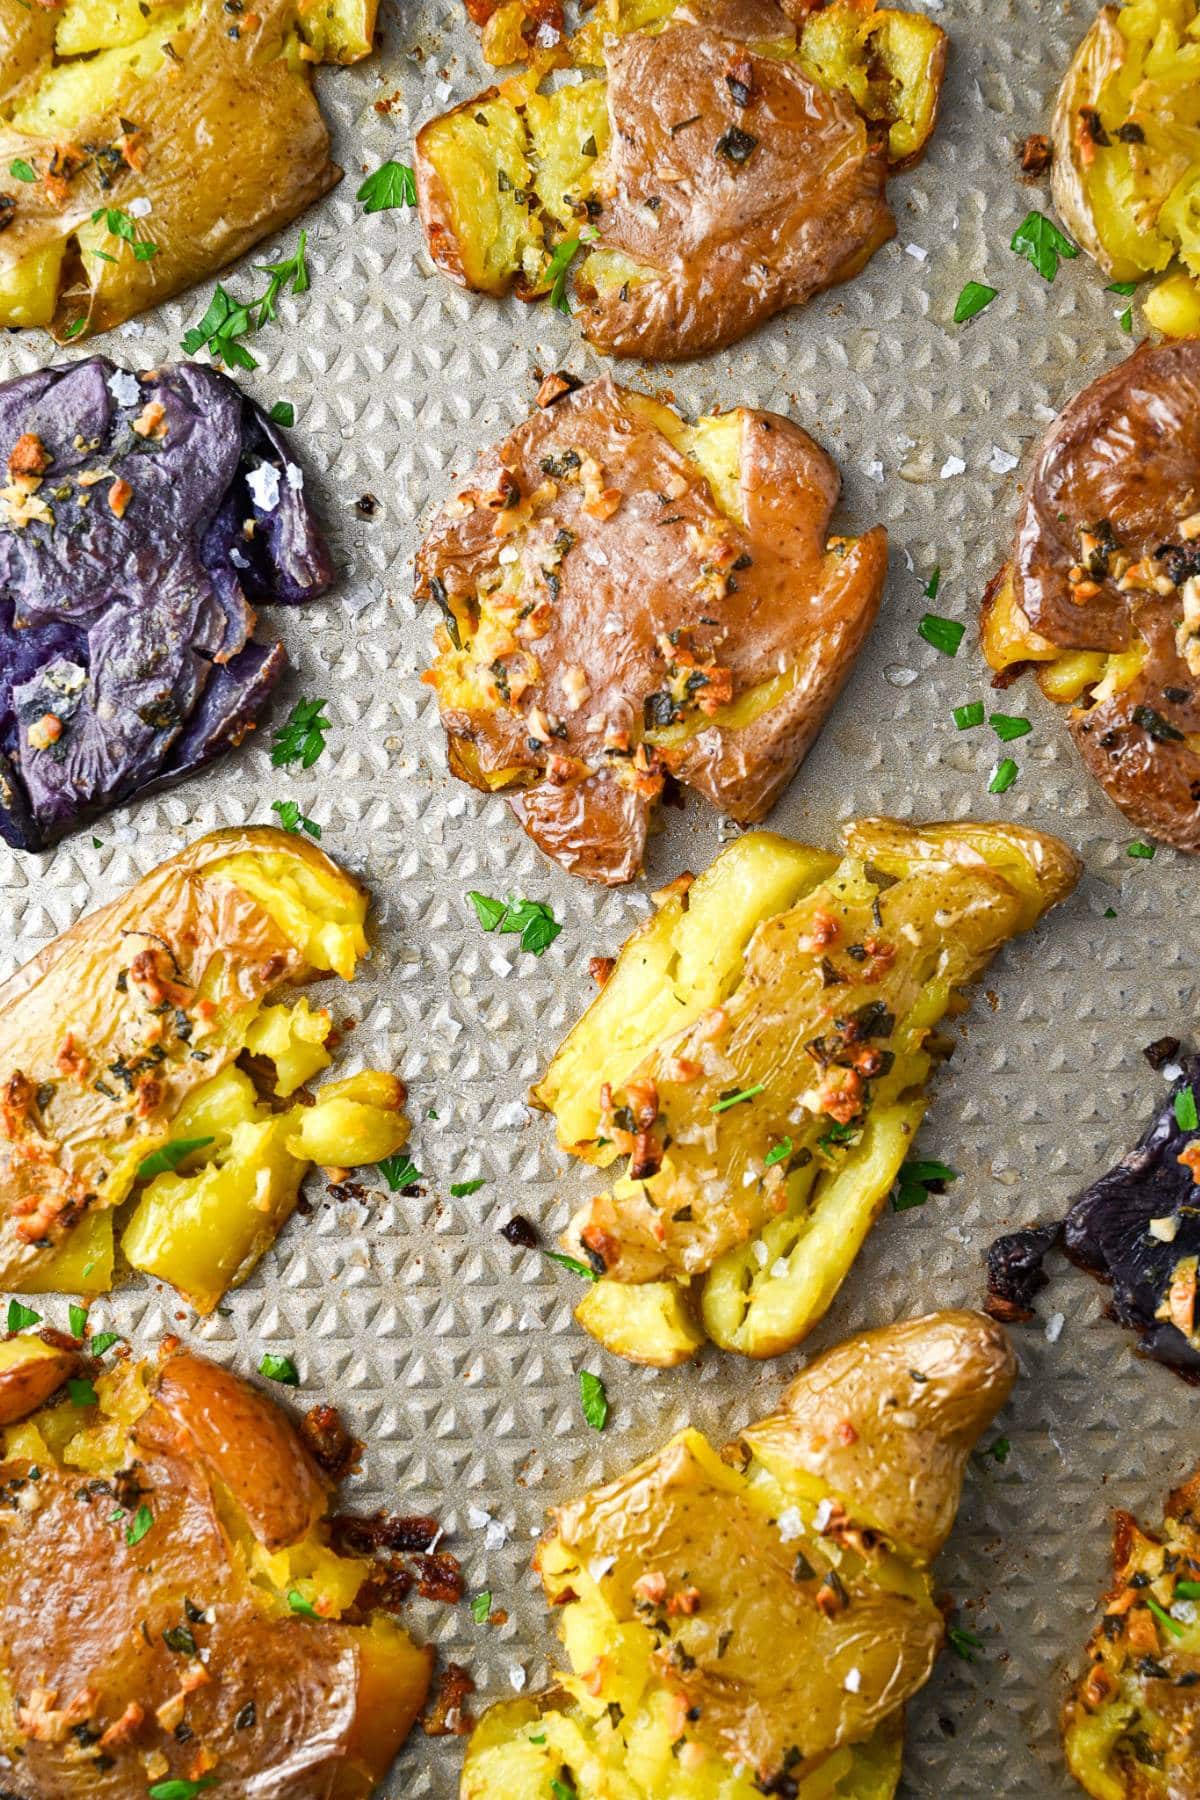 Sheet pan with colorful smashed fingerling potatoes oven-roasted in a Greek herb and olive oil butter mixture.